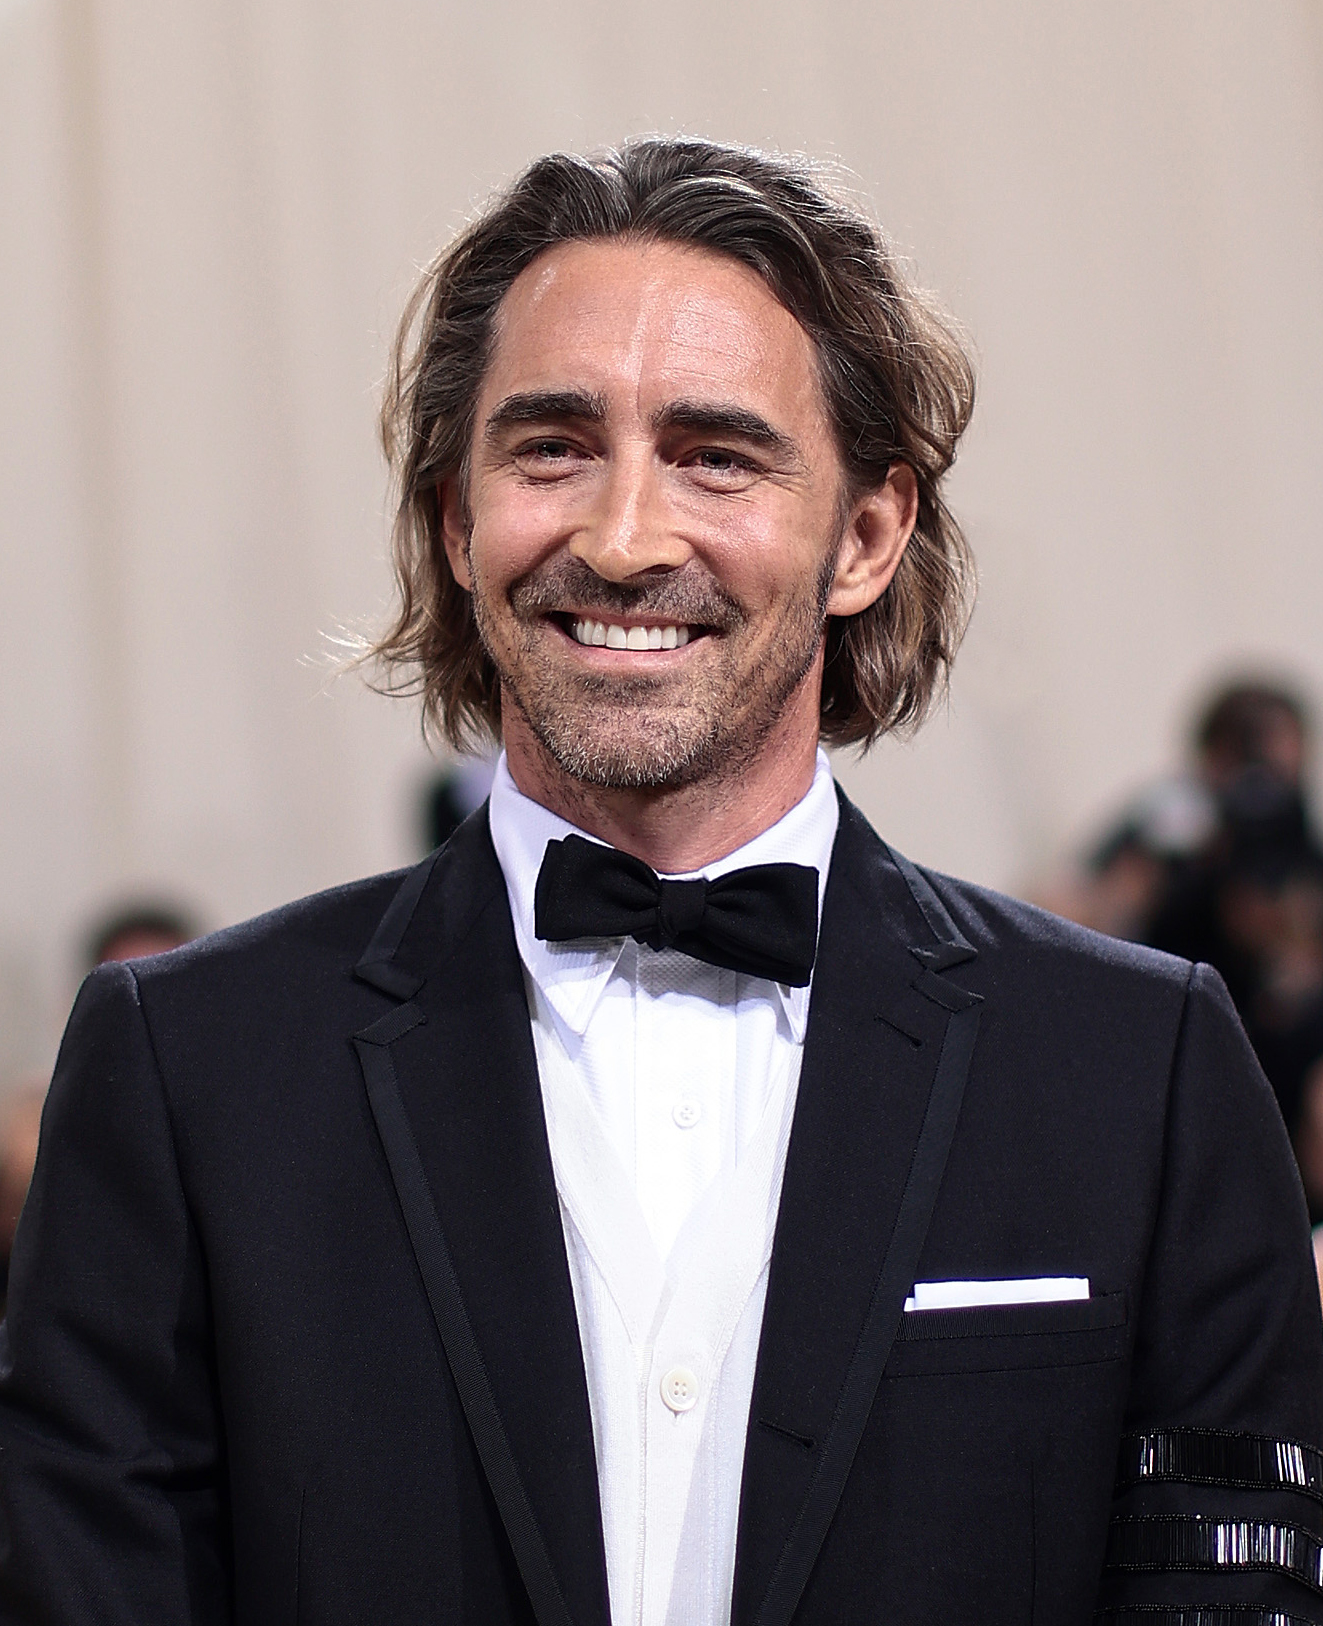 Lee Pace (American Actor) - Age, Height, Partner, Movies